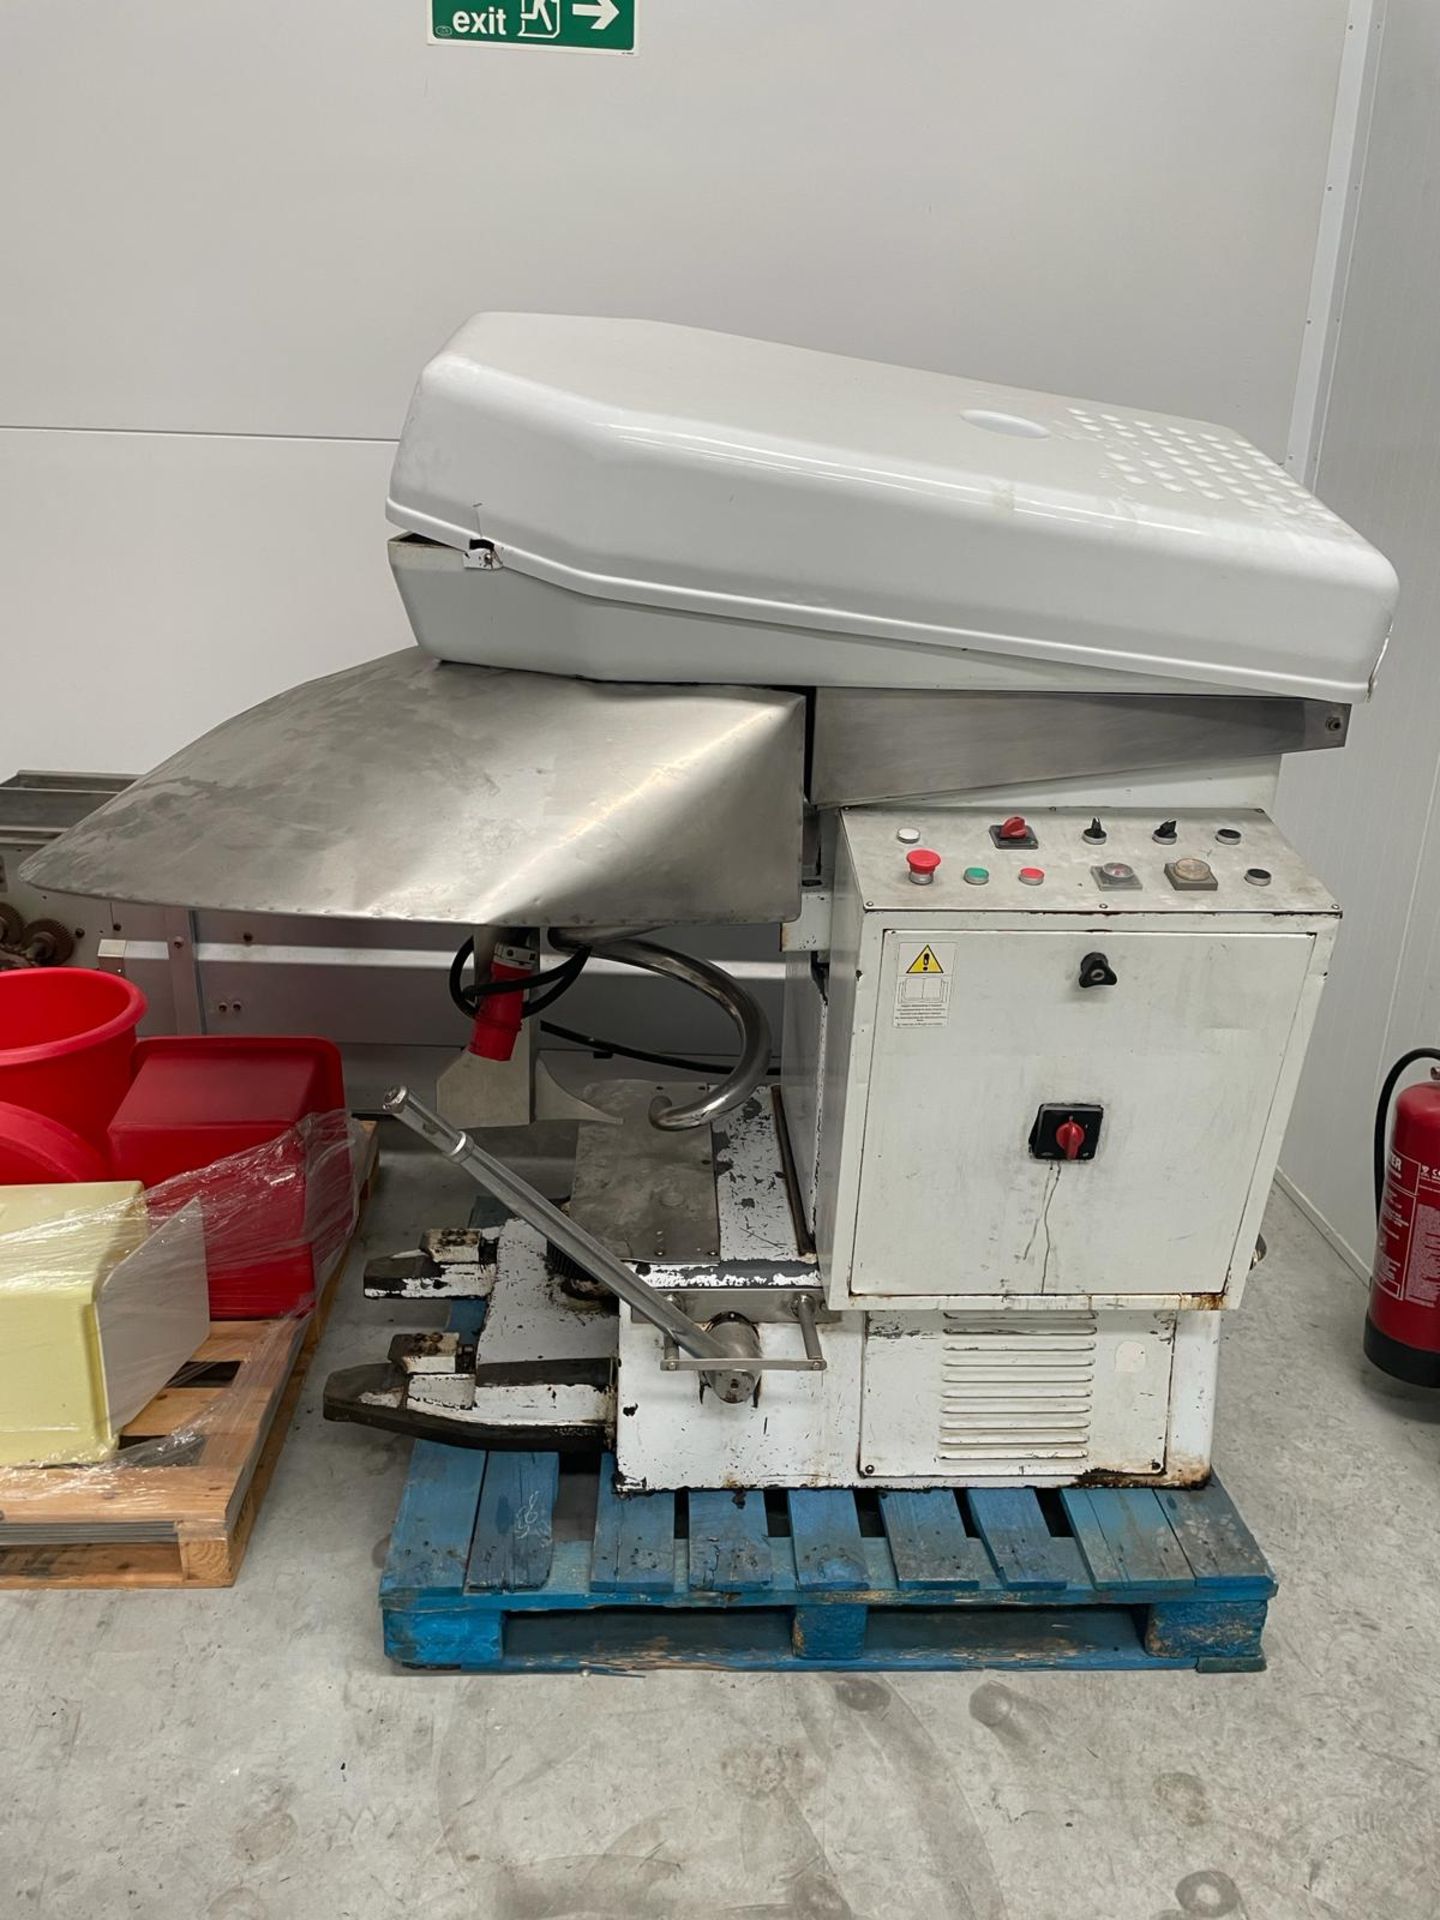 Esmach SPA Spiral Mixer. Stainless Steel Bowl Dia 1000 x 400 mm 2004. Comes with 2 Bowls. Please